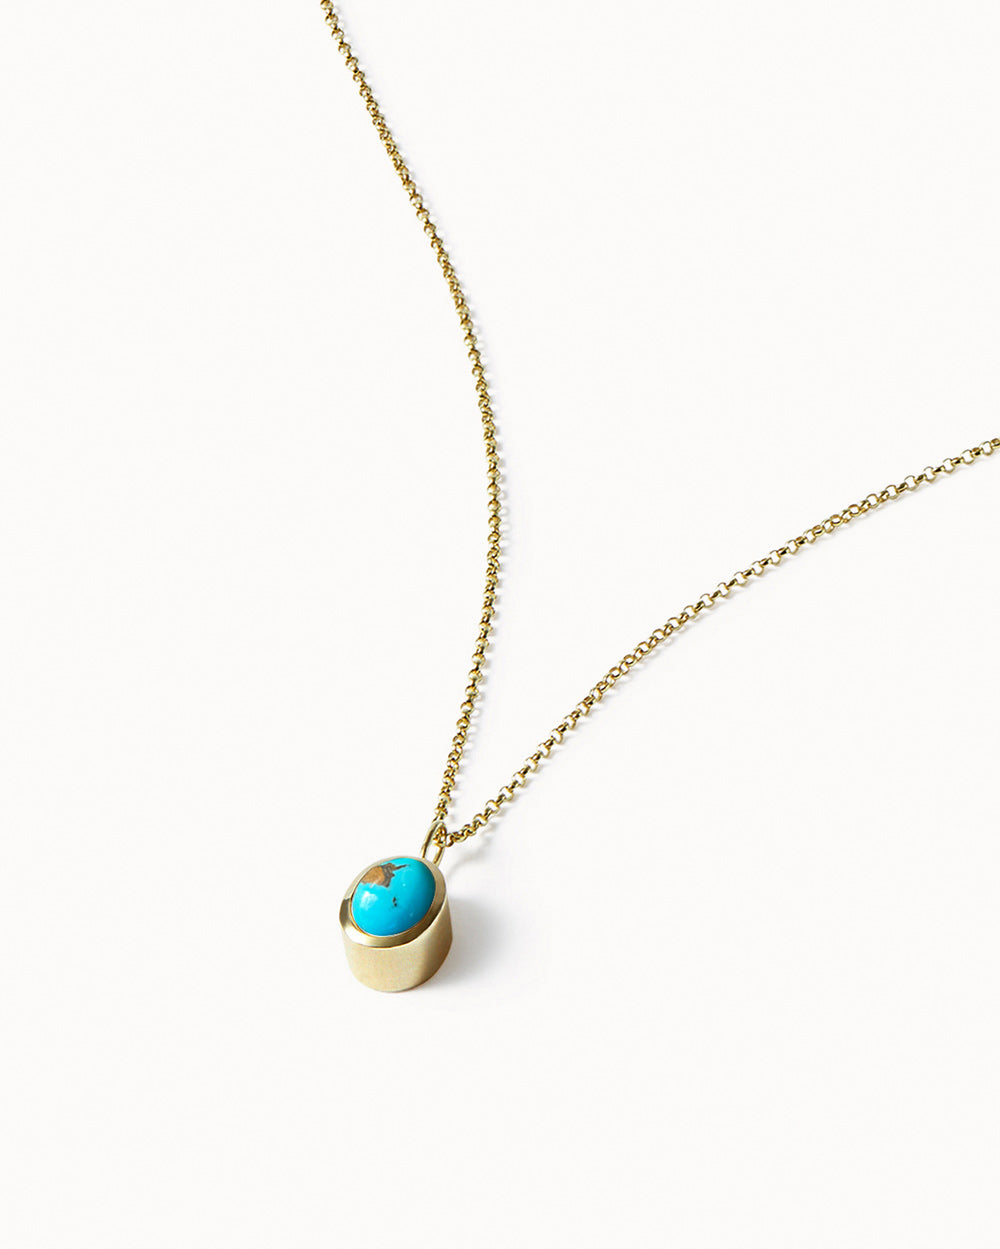 POM Golden Round Turquoise Necklace - Boutique from Readers Interiors UK